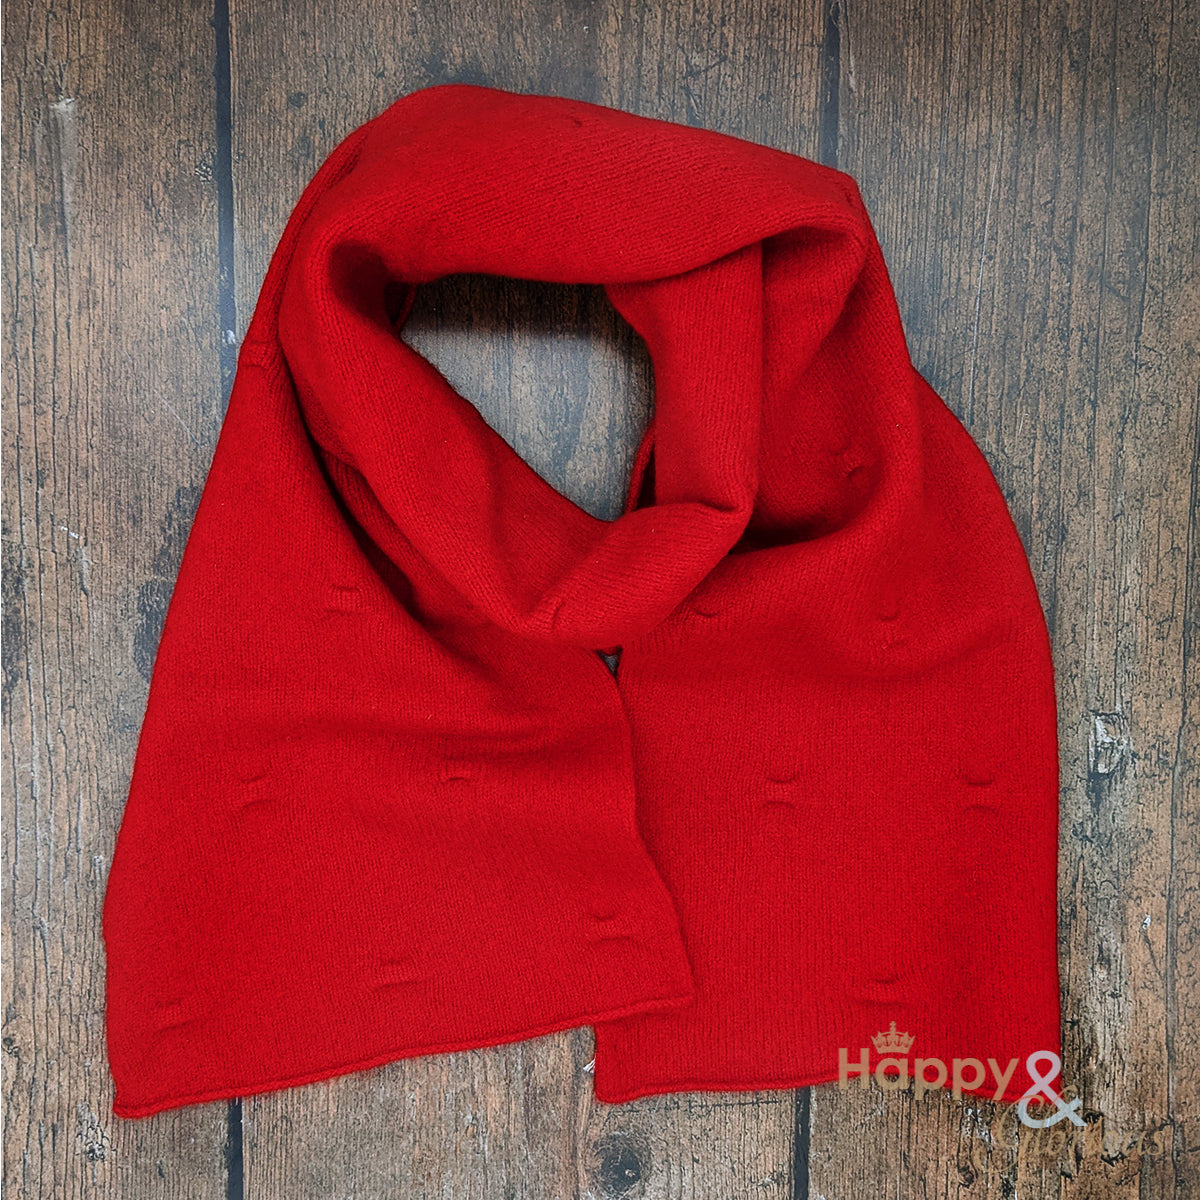 Red felted merino wool scarf